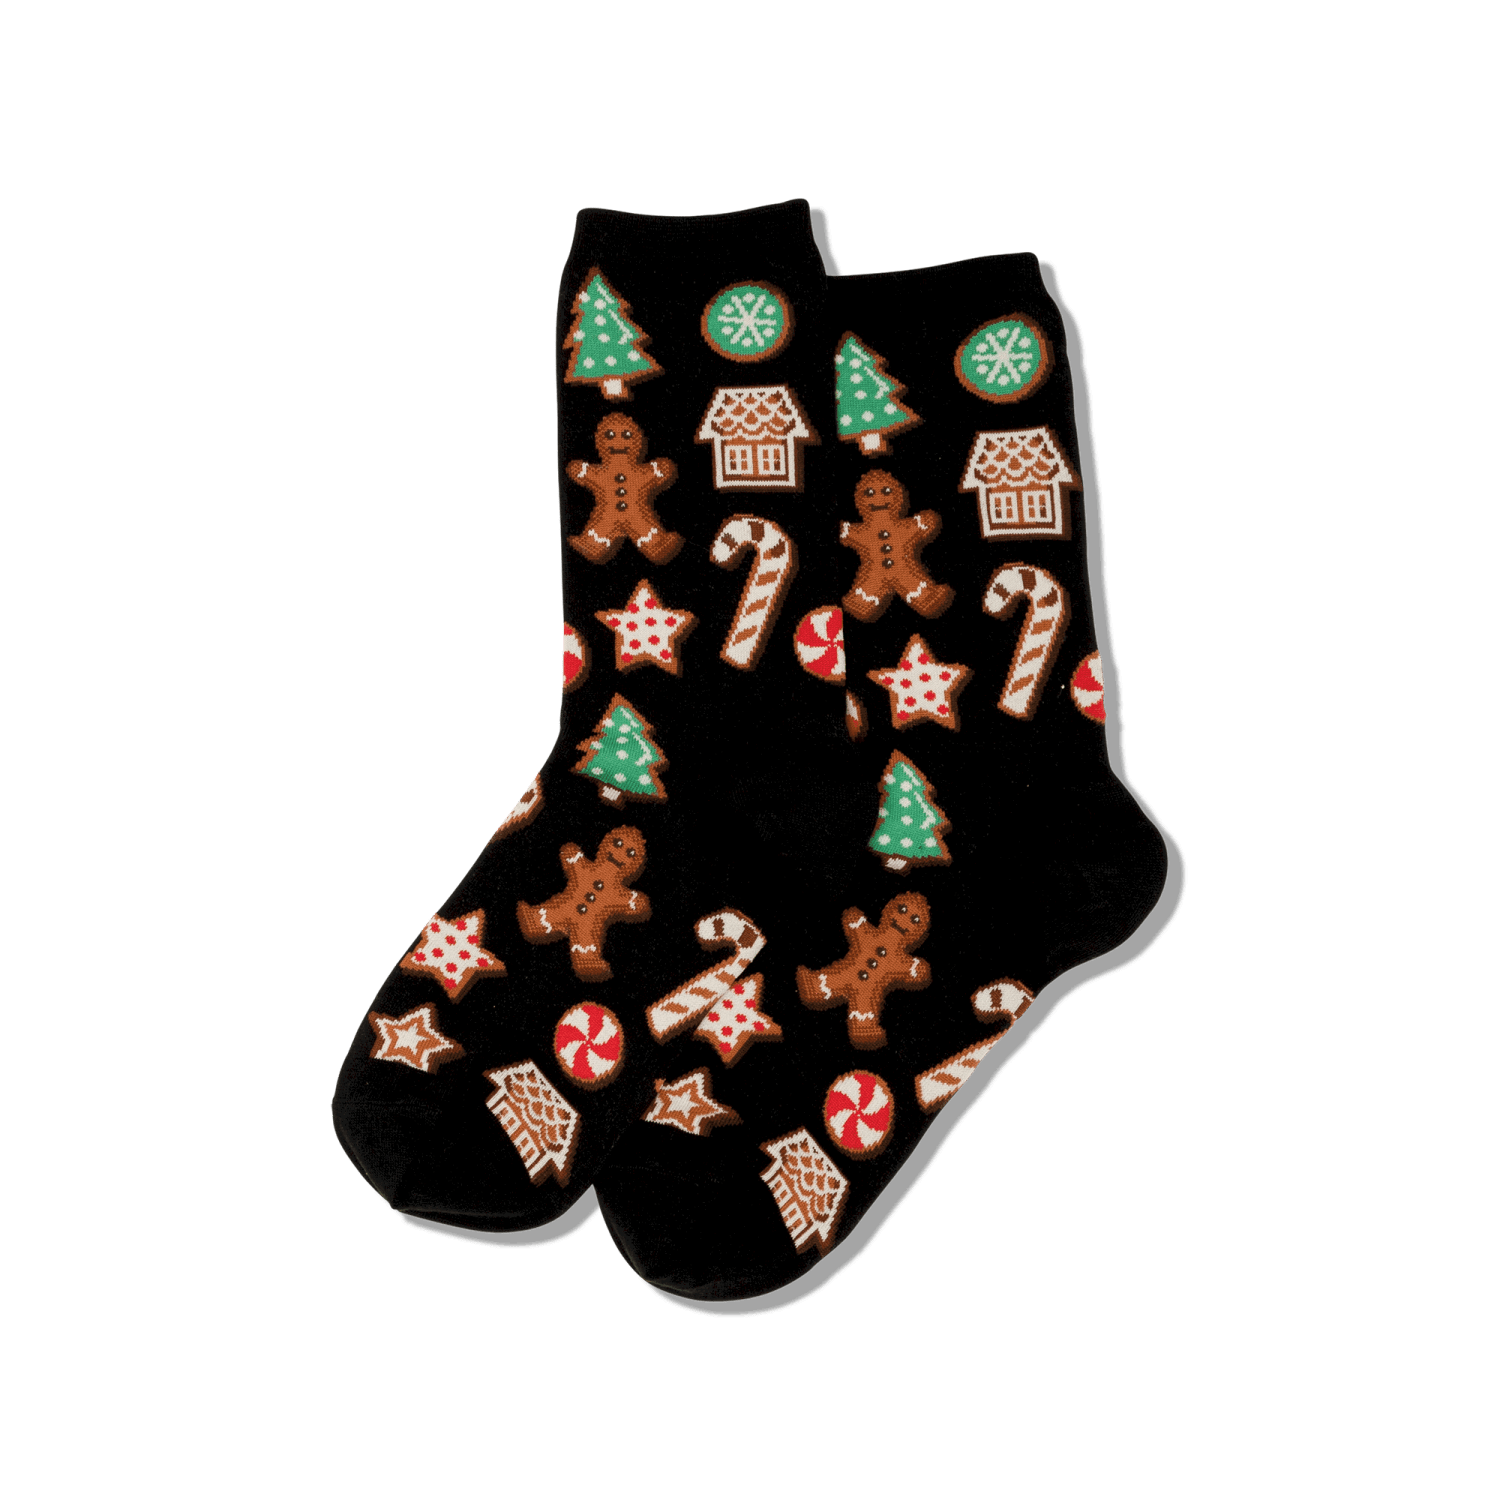 Details about   Christmas Stocking Fluff Non-Slip Home Warm Sleeping Cute Socks Ornament Gift US 